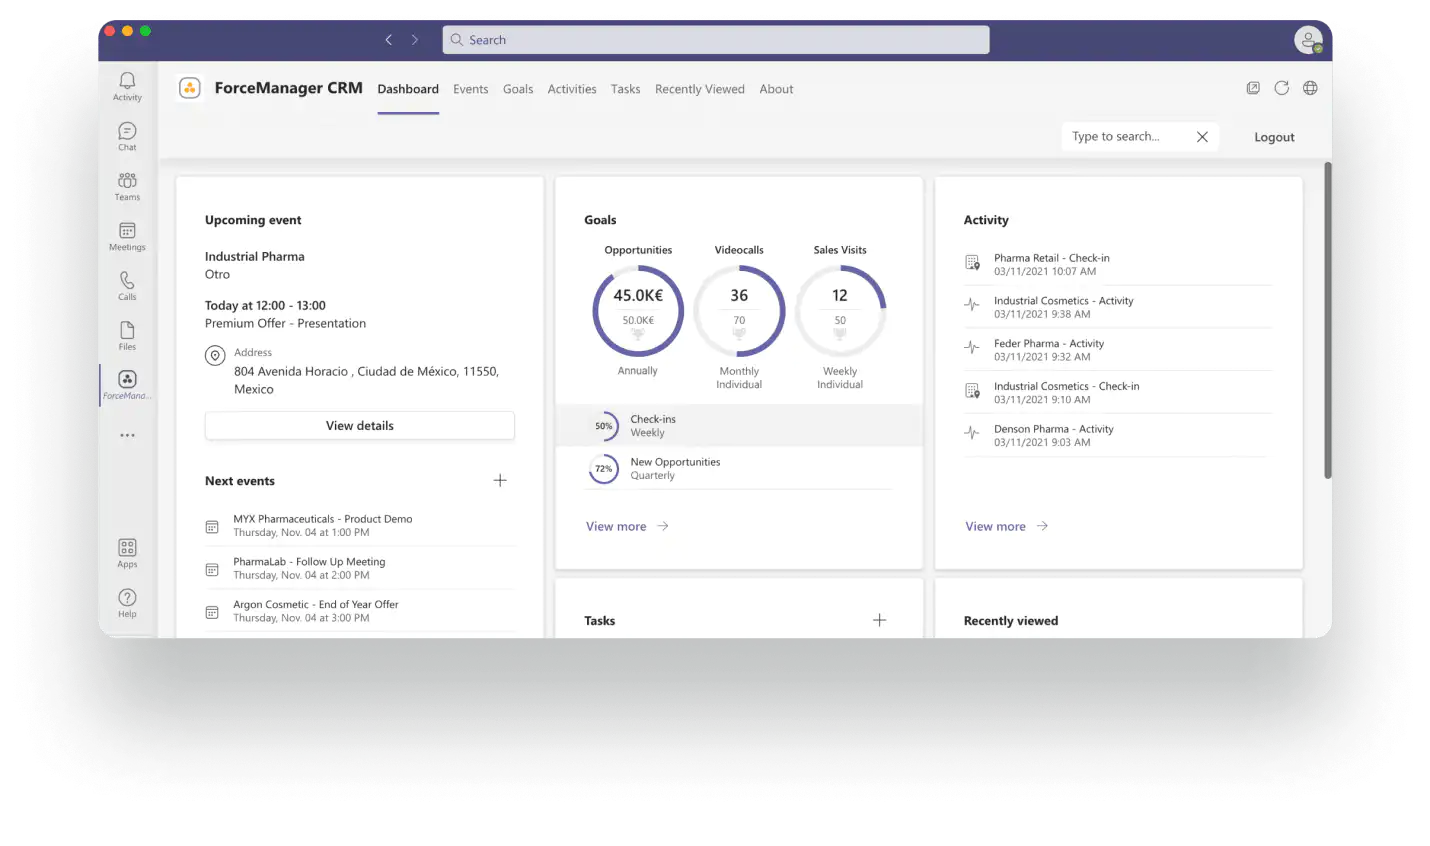 Information Visibility Dashboard in Microsoft Teams